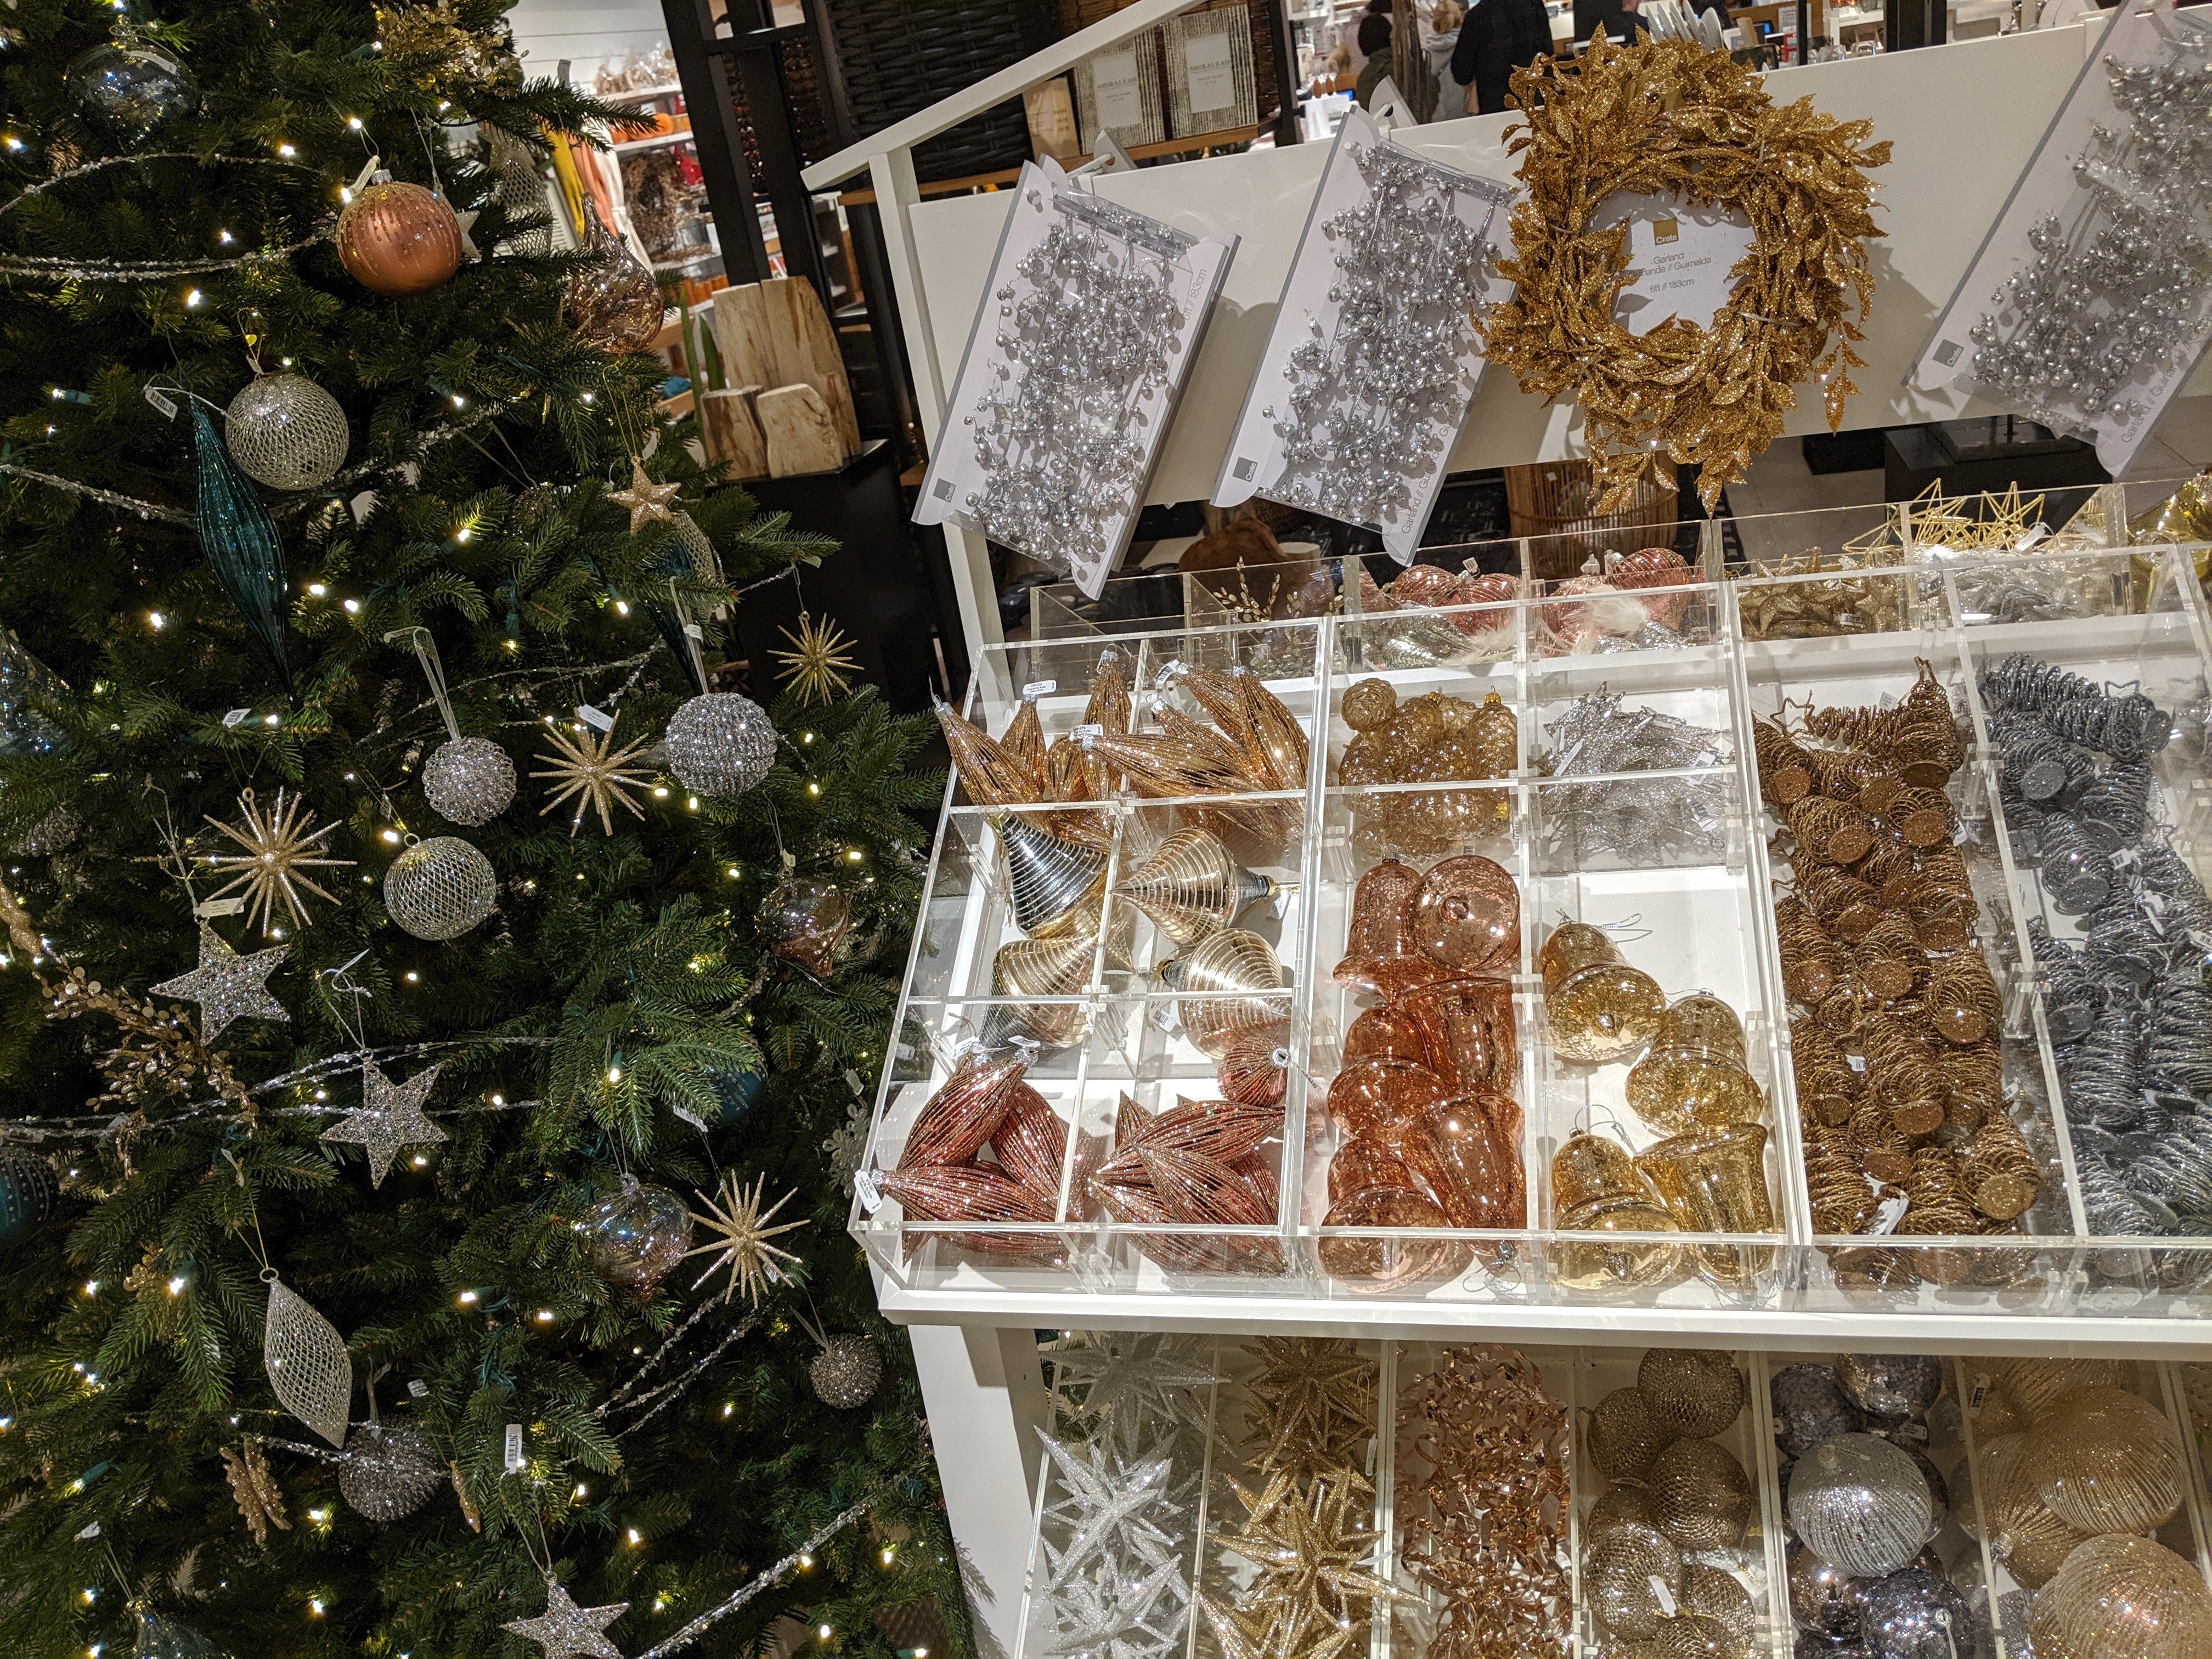 Christmas ornaments at crate and barrel!